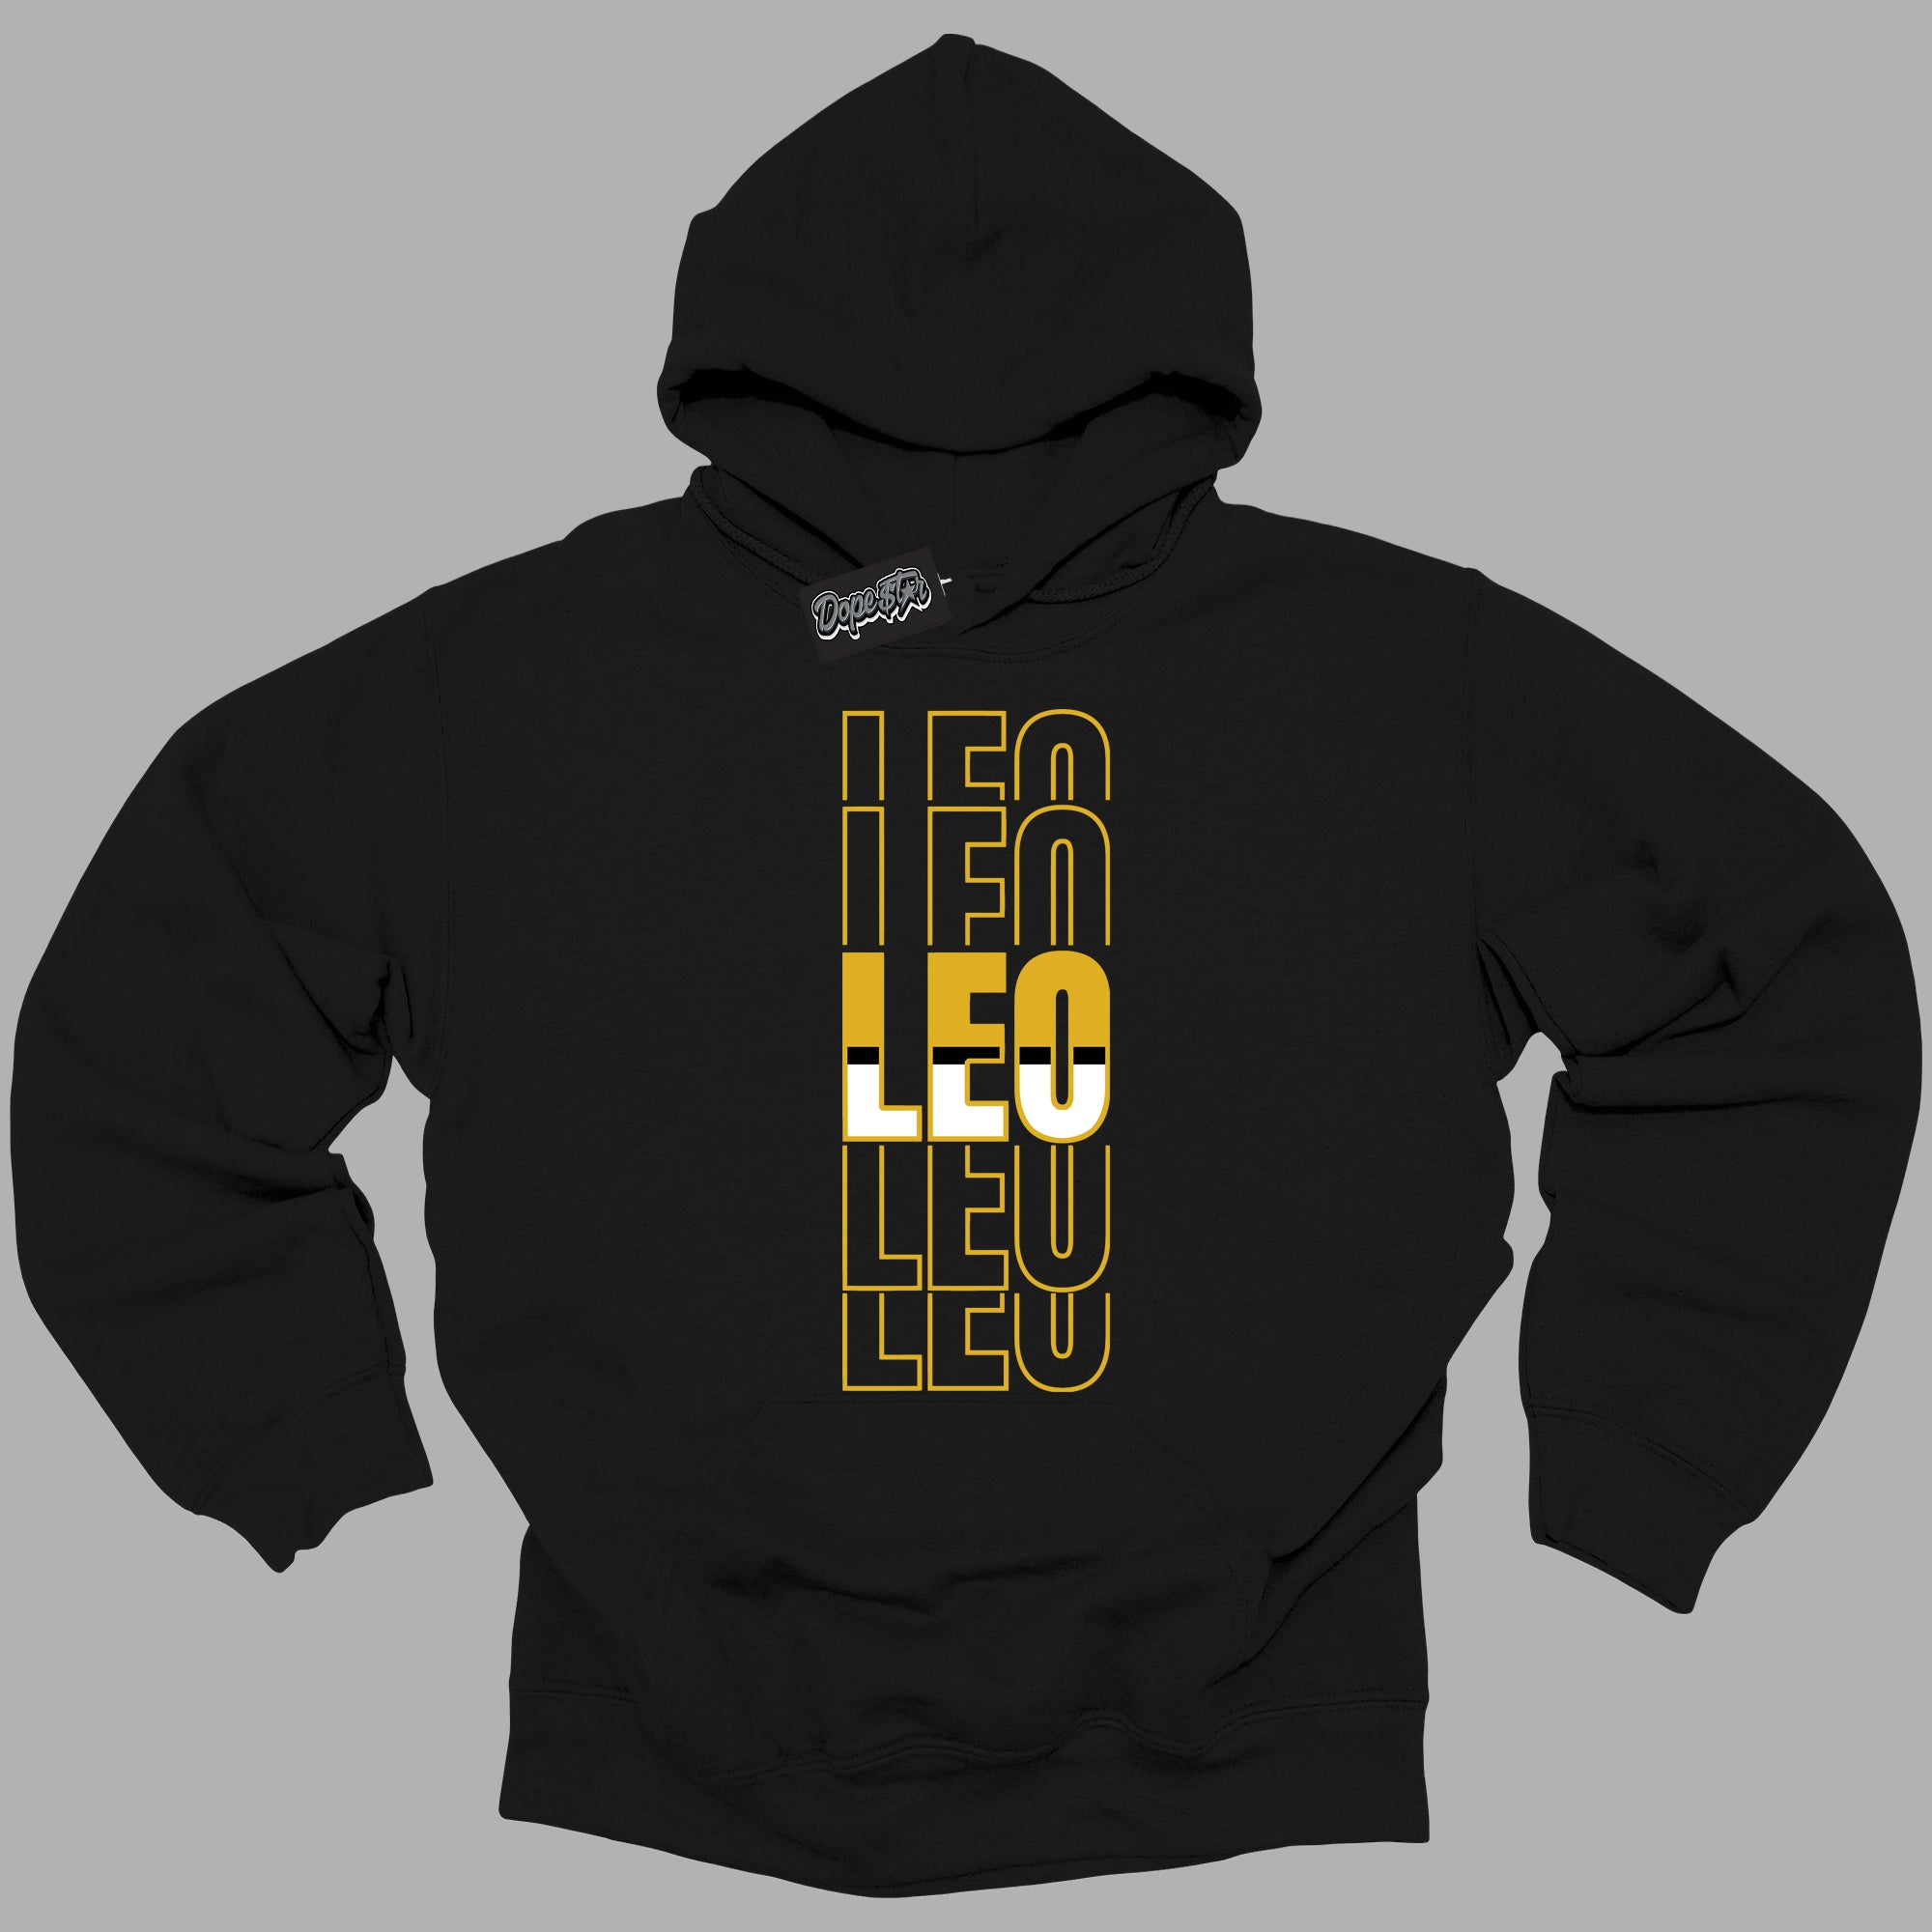 Cool Black Hoodie with “ Leo ”  design that Perfectly Matches Yellow Ochre 6s Sneakers.